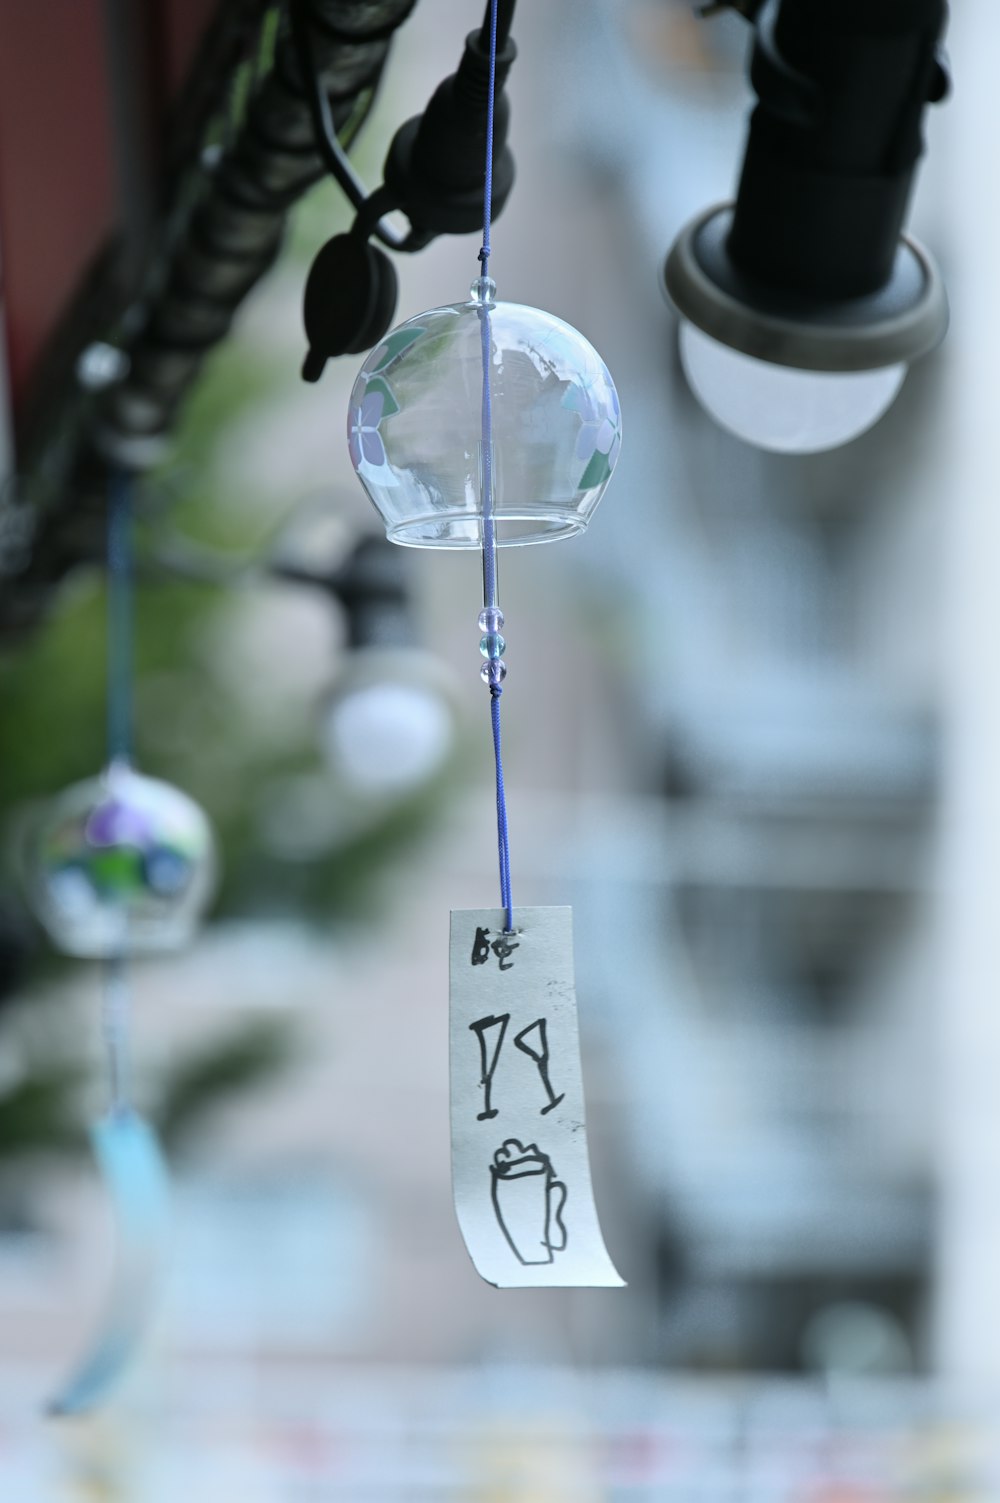 a close up of a wind chime hanging from a ceiling